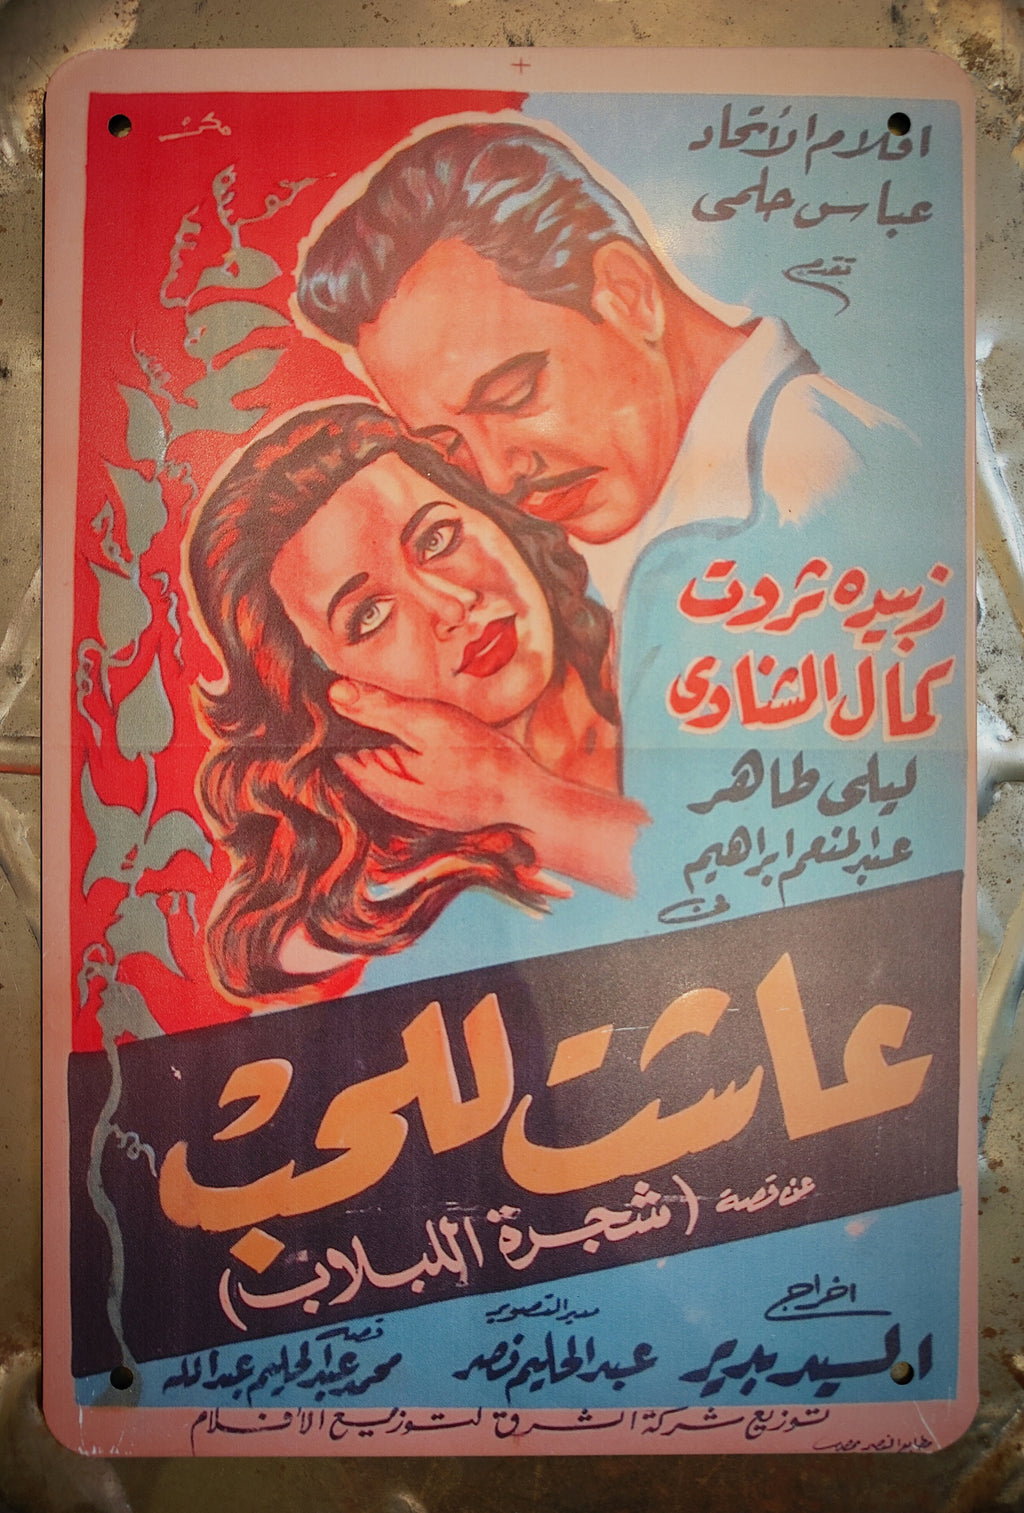 Best viintage Arabic film poster on a tin sign! 

Great up on the wall or even tile behind a sink or cooker with them for a bit of eye joy!!

20x30cm

Printed tin

Not original vintage.

